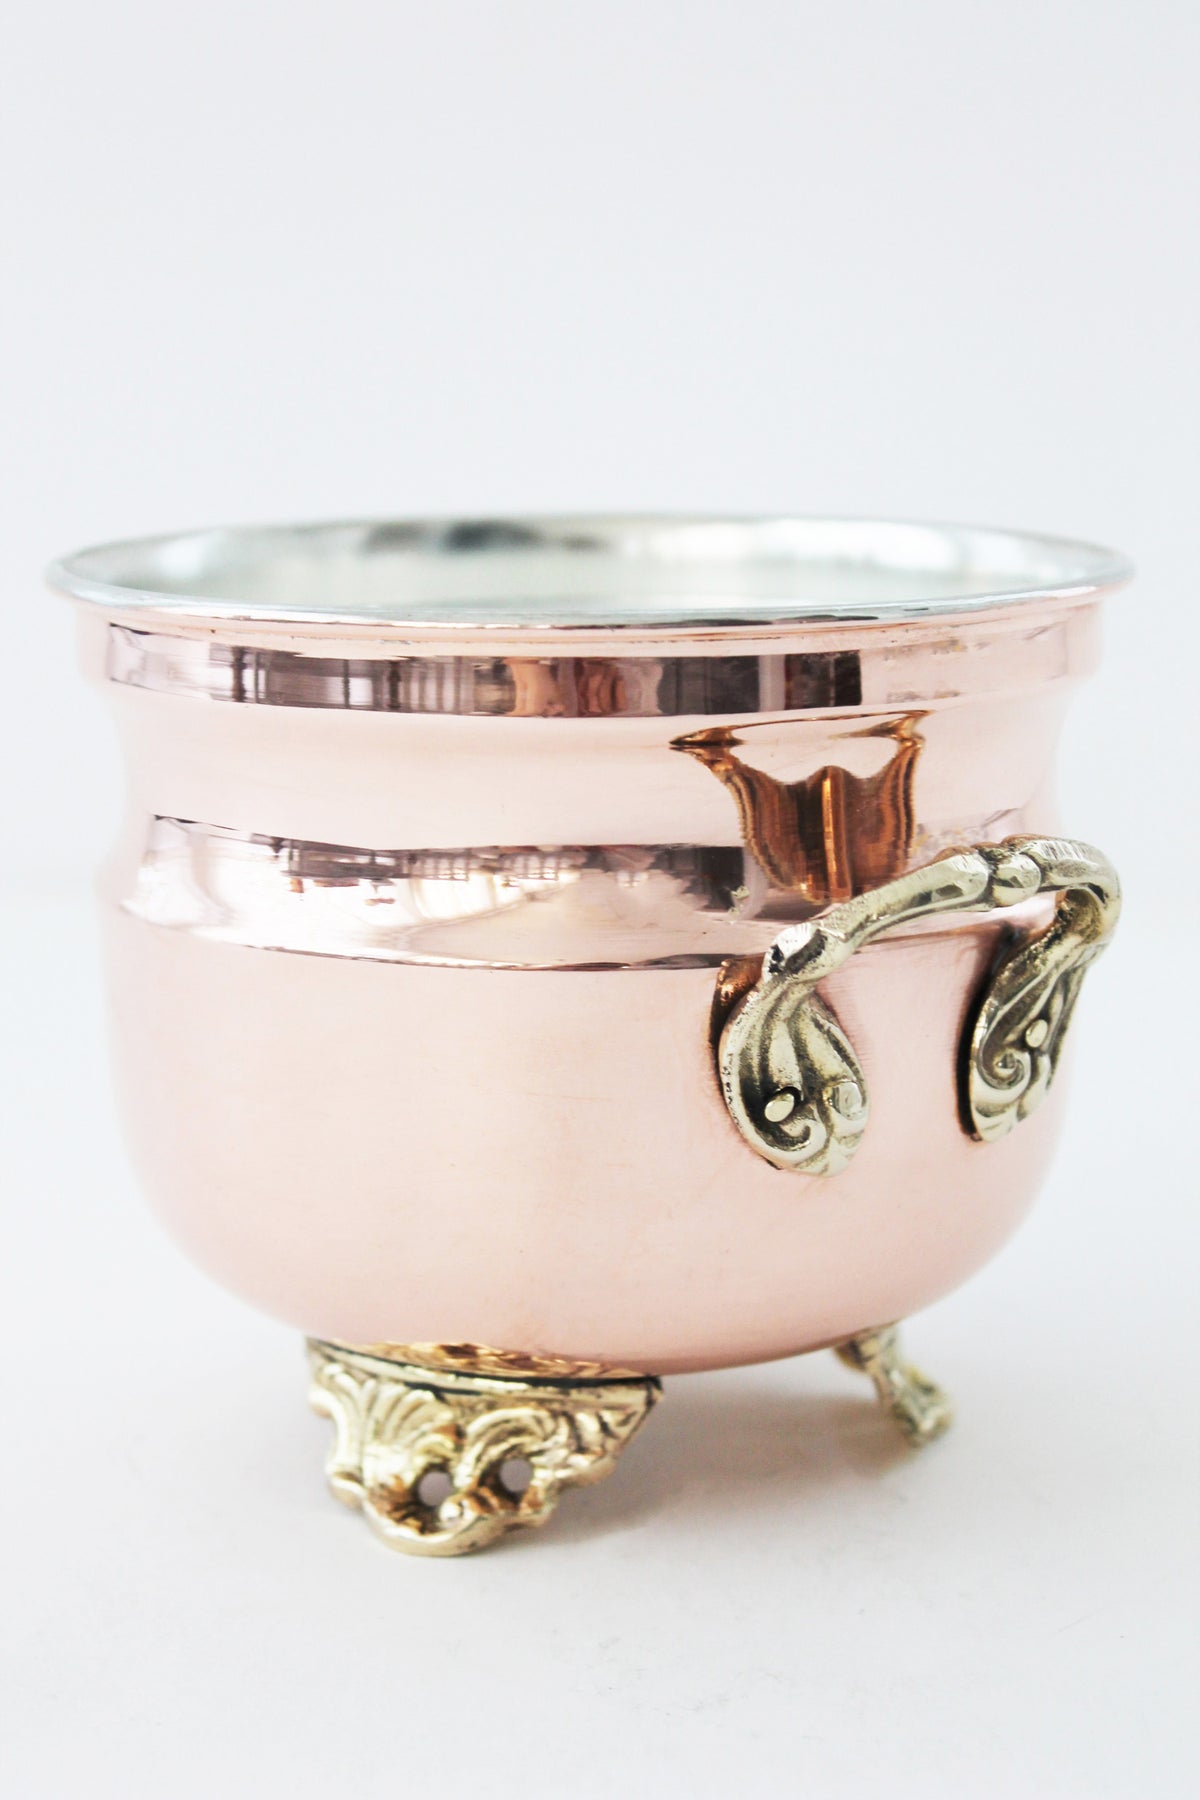 CMK Vintage French Inspired Grapefruit Mint Jardiniere Candle